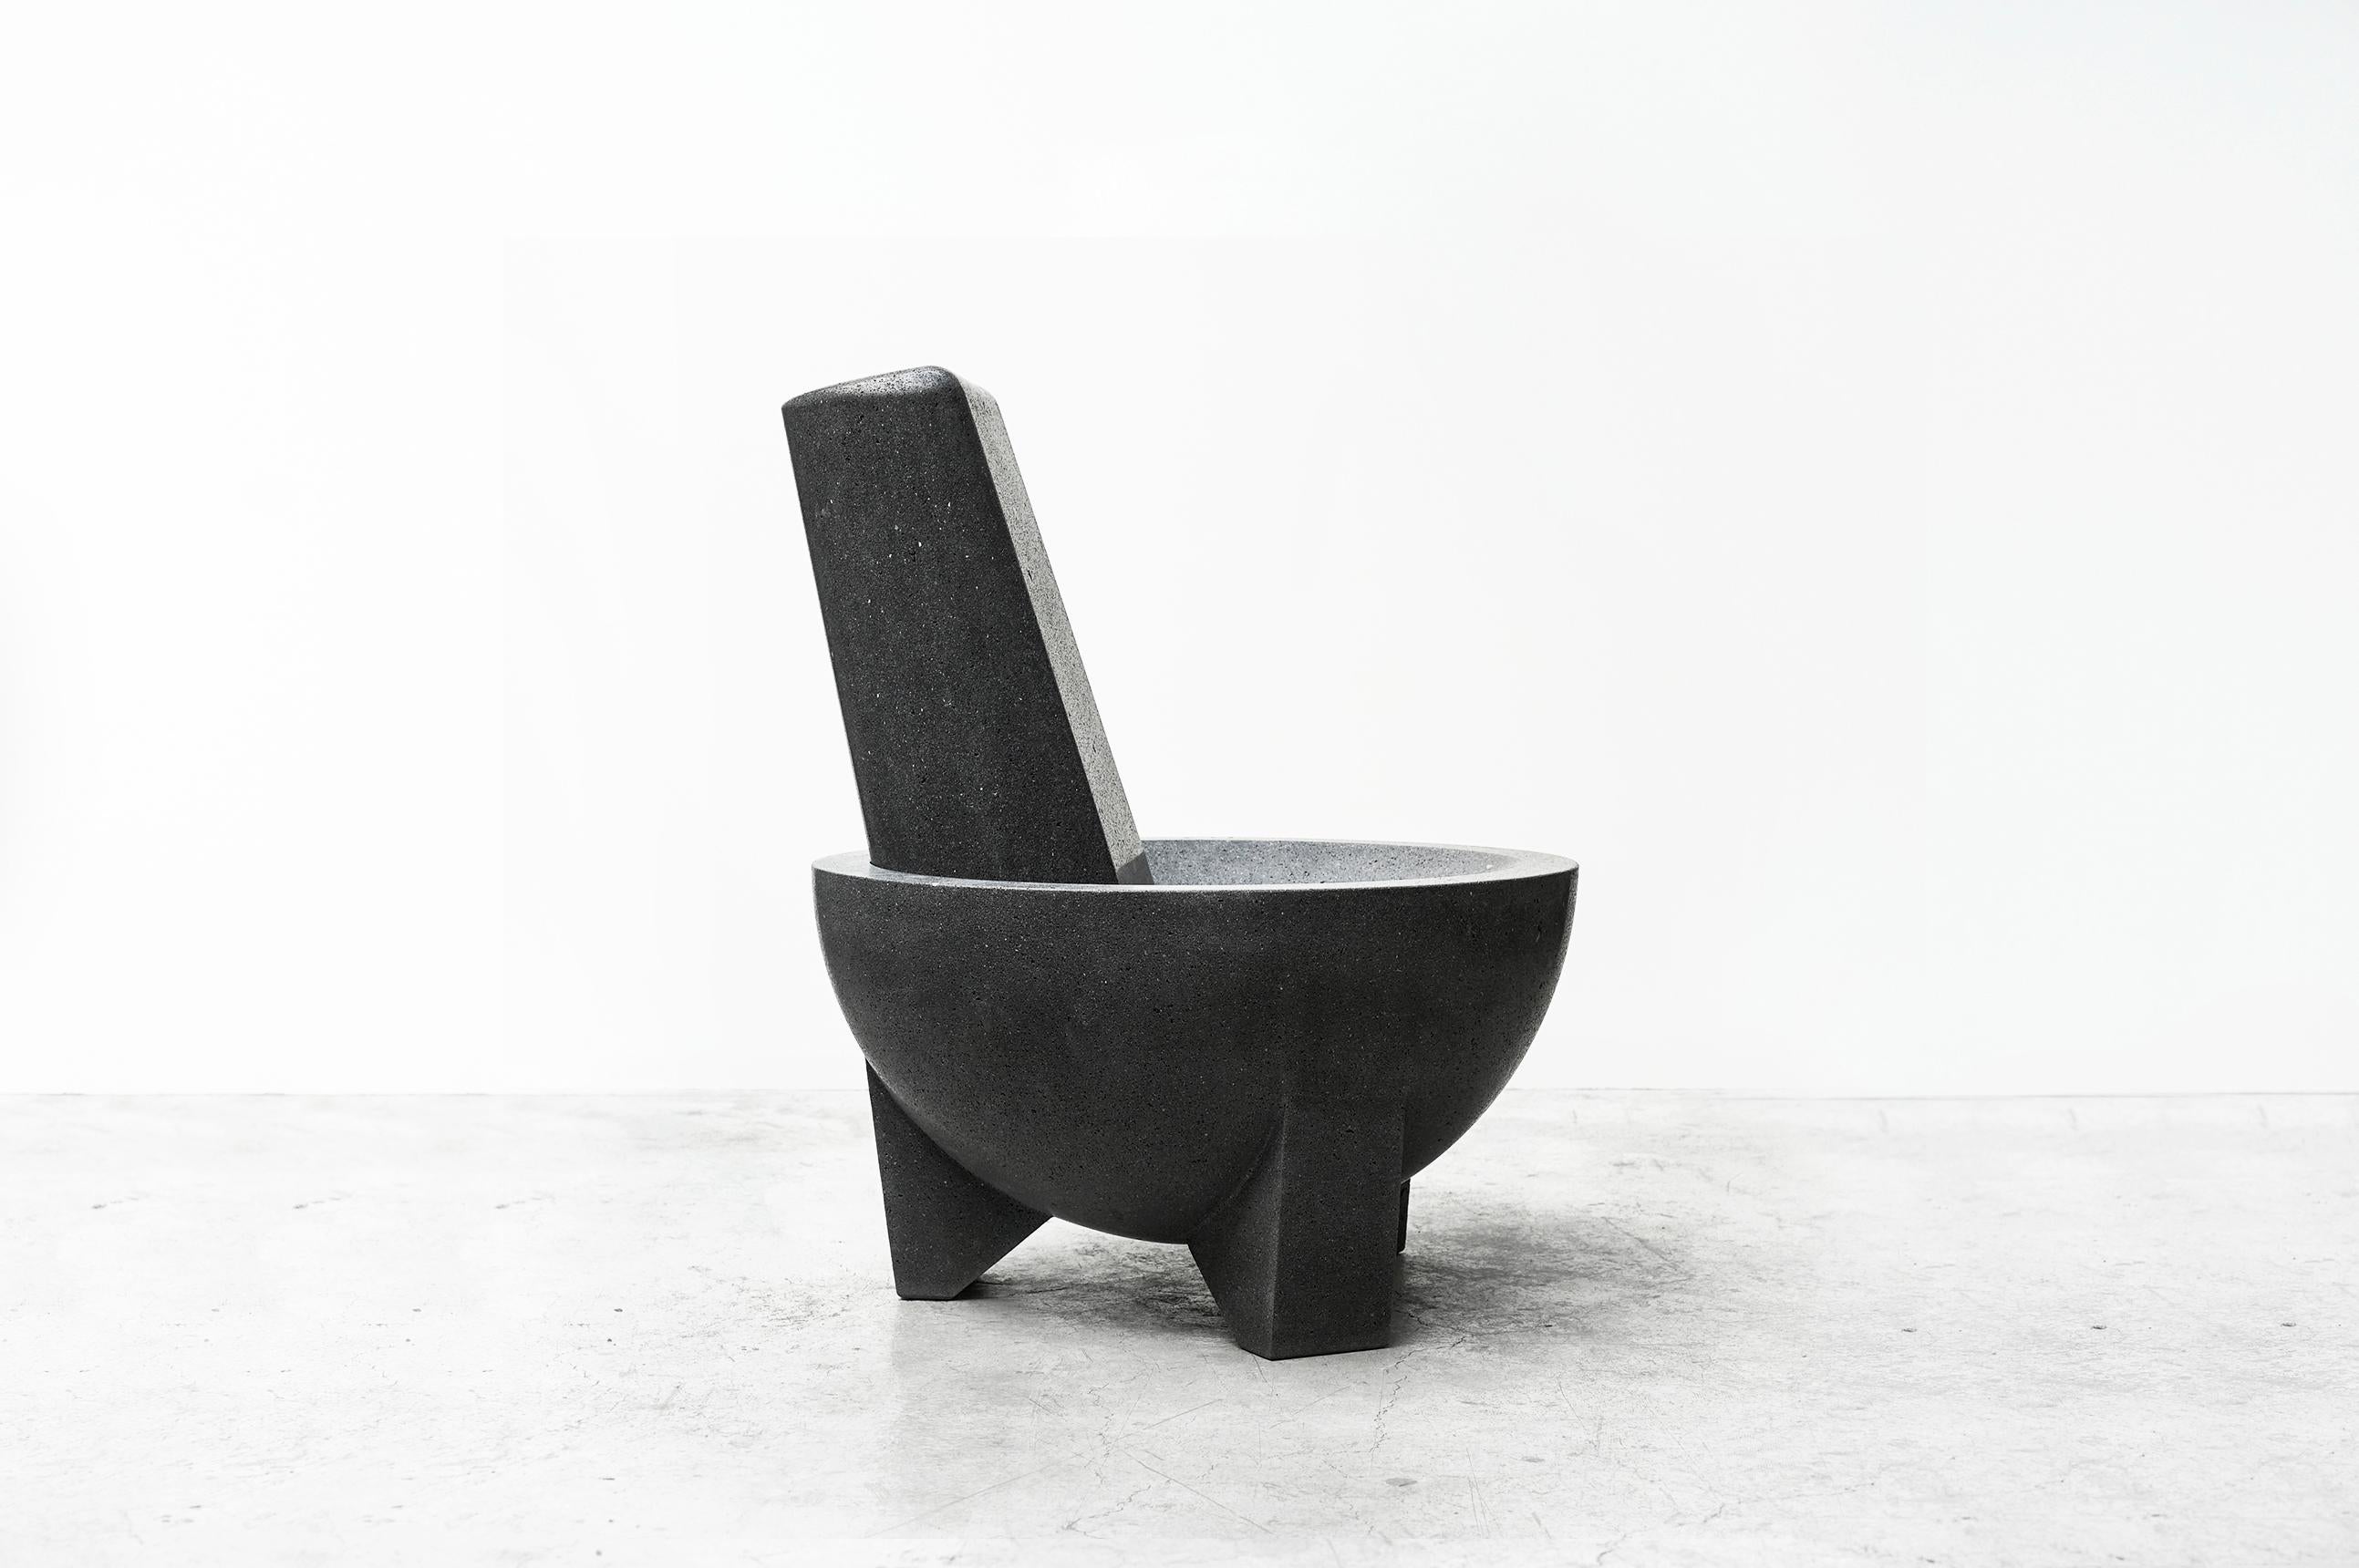 Molcajete chair ‘Mortar Chair'
From Series Tripod
Manufactured by Pedro Reyes
Produced exclusively for side gallery
Mexico, 2018
Volcanic stone.